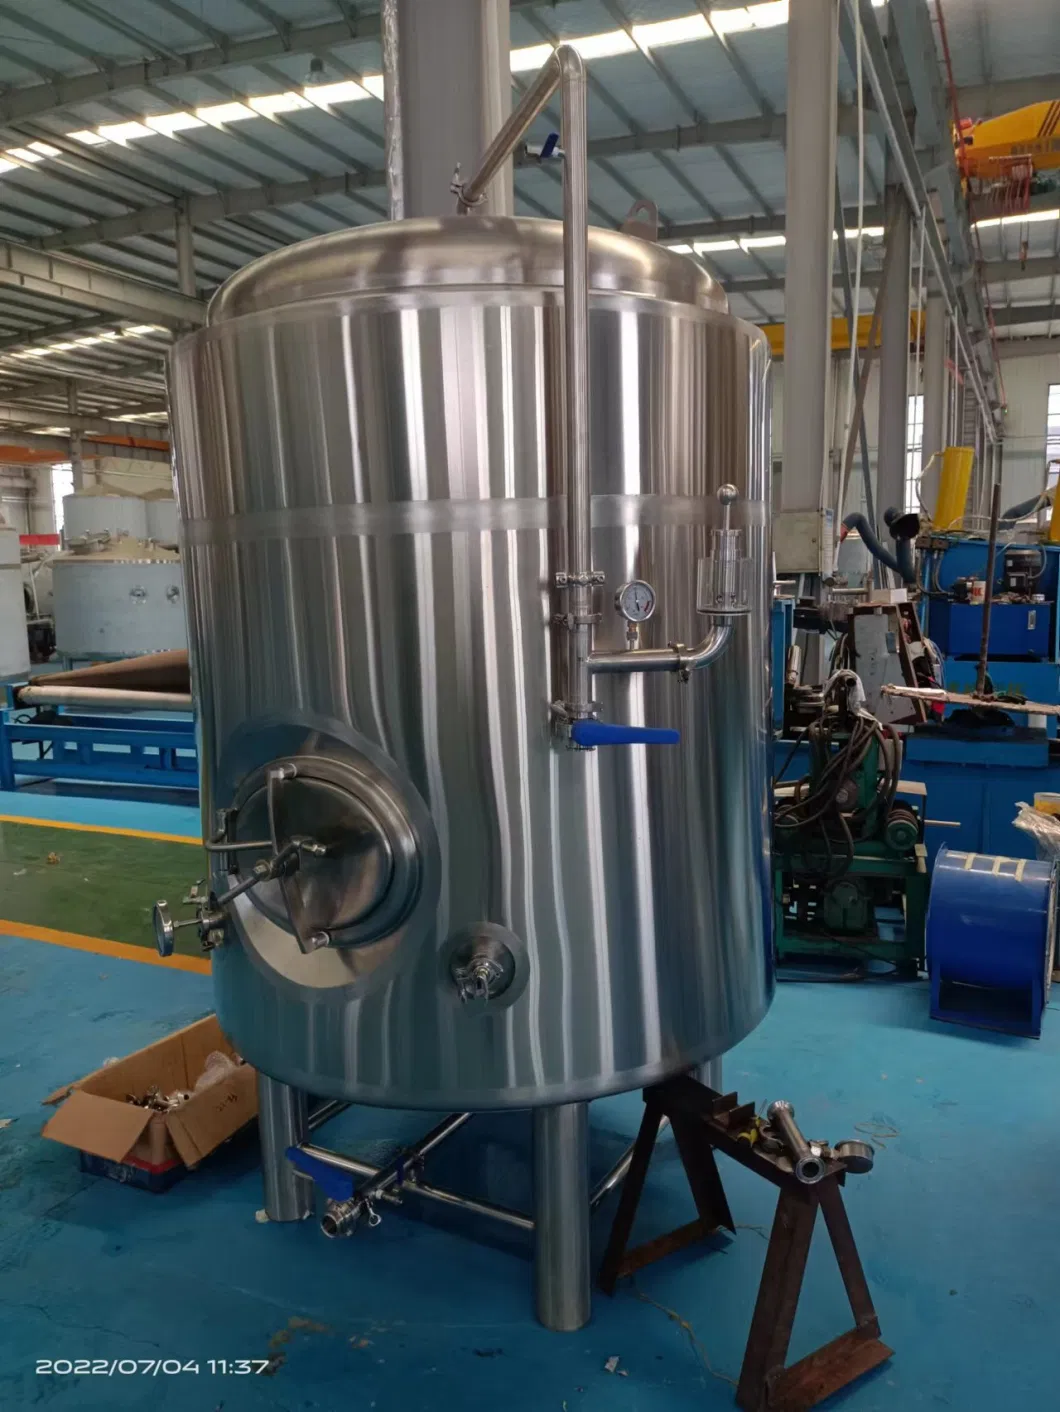 400L 4hl Bbt Brite / Bright Beer Tanks for Beer Brewery Brewing System Equipment